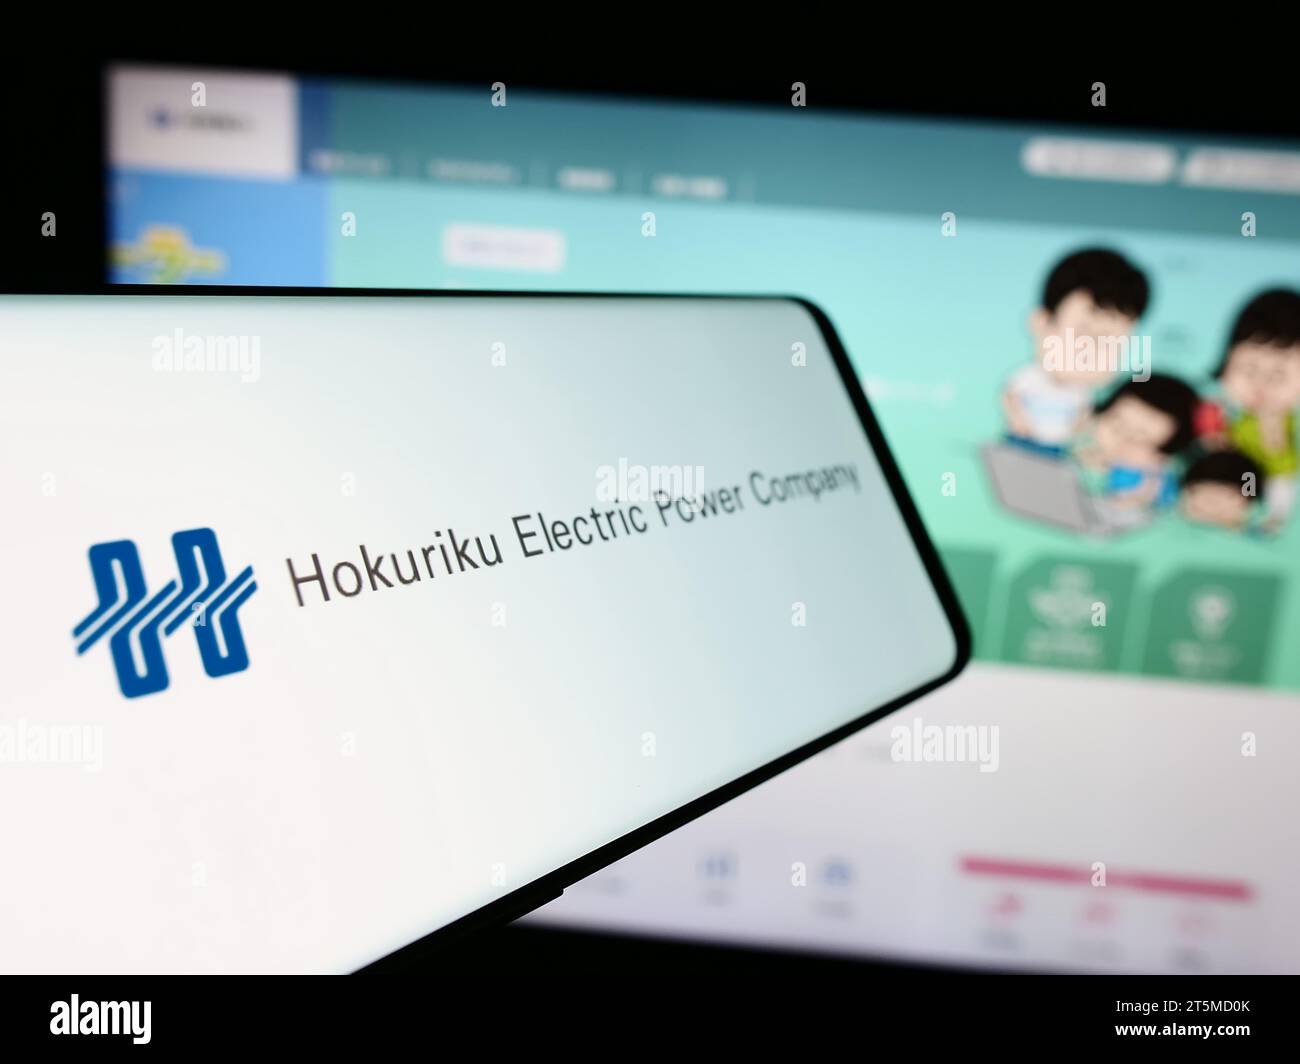 Cellphone with logo of Japanese energy business Hokuriku Electric Power Company in front of website. Focus on center-left of phone display. Stock Photo